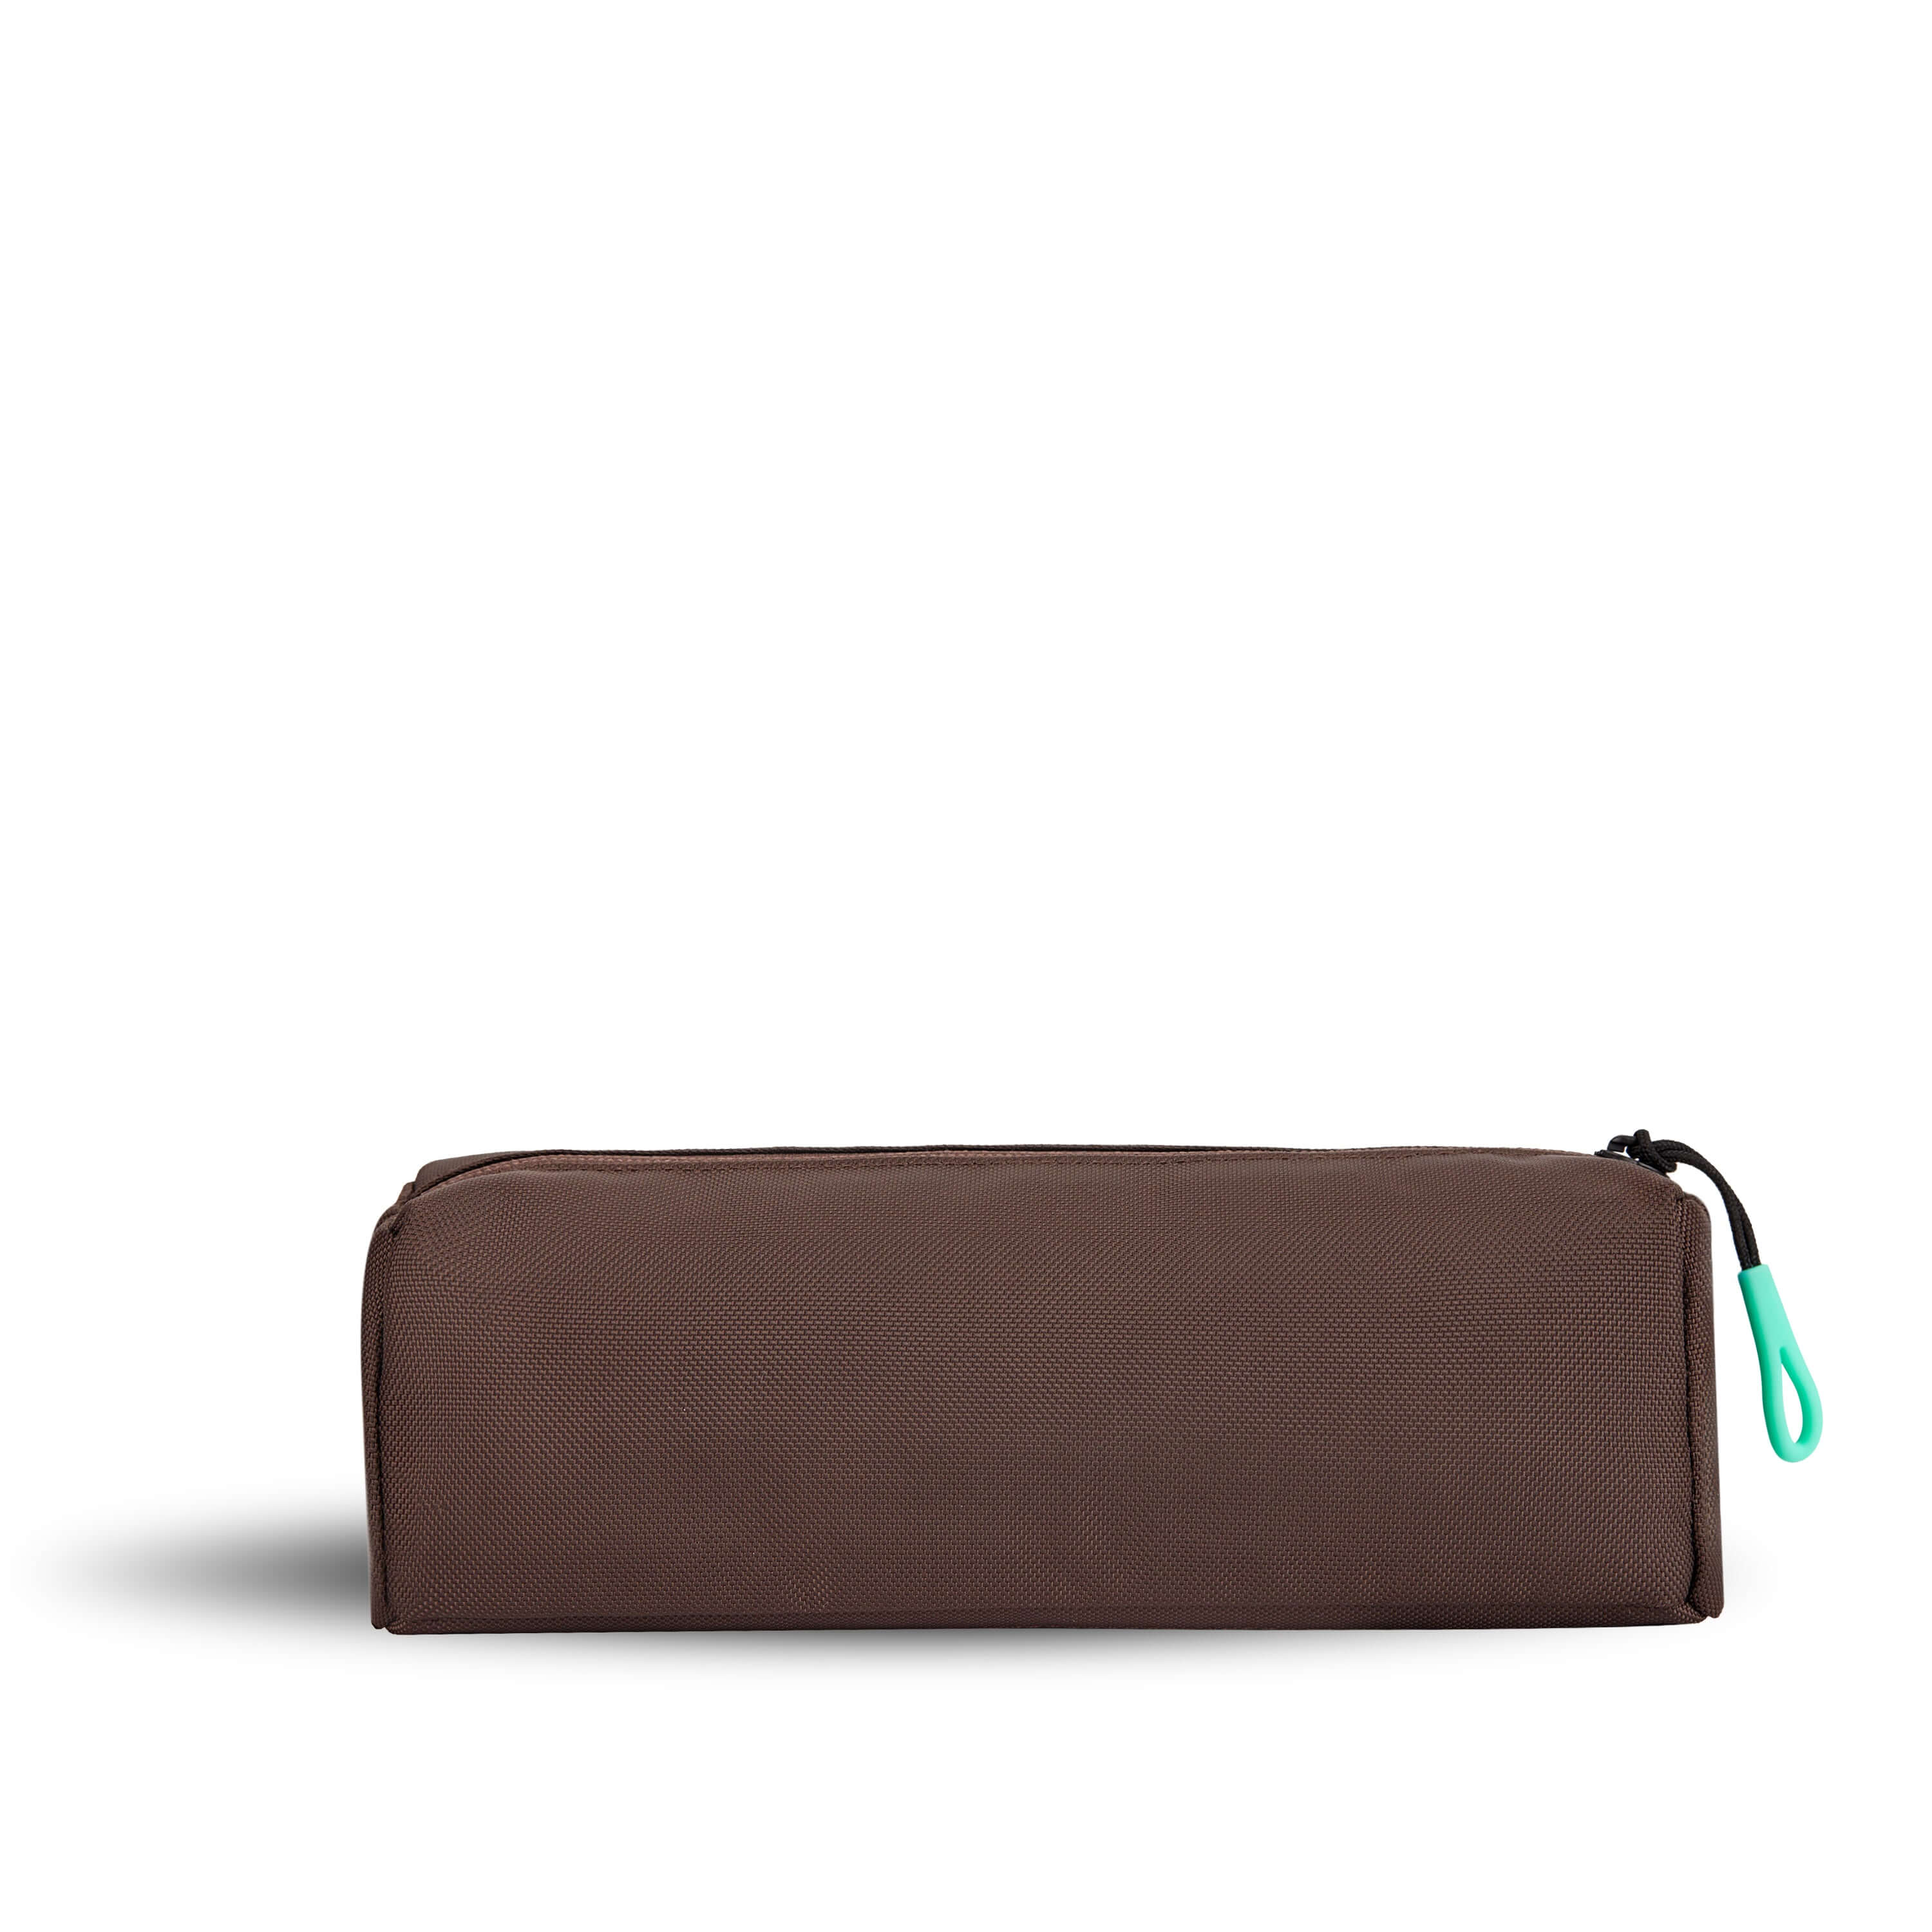 Back view of Sherpani travel accessory, the Poet in Seagreen. The back of the pouch is entirely brown. 